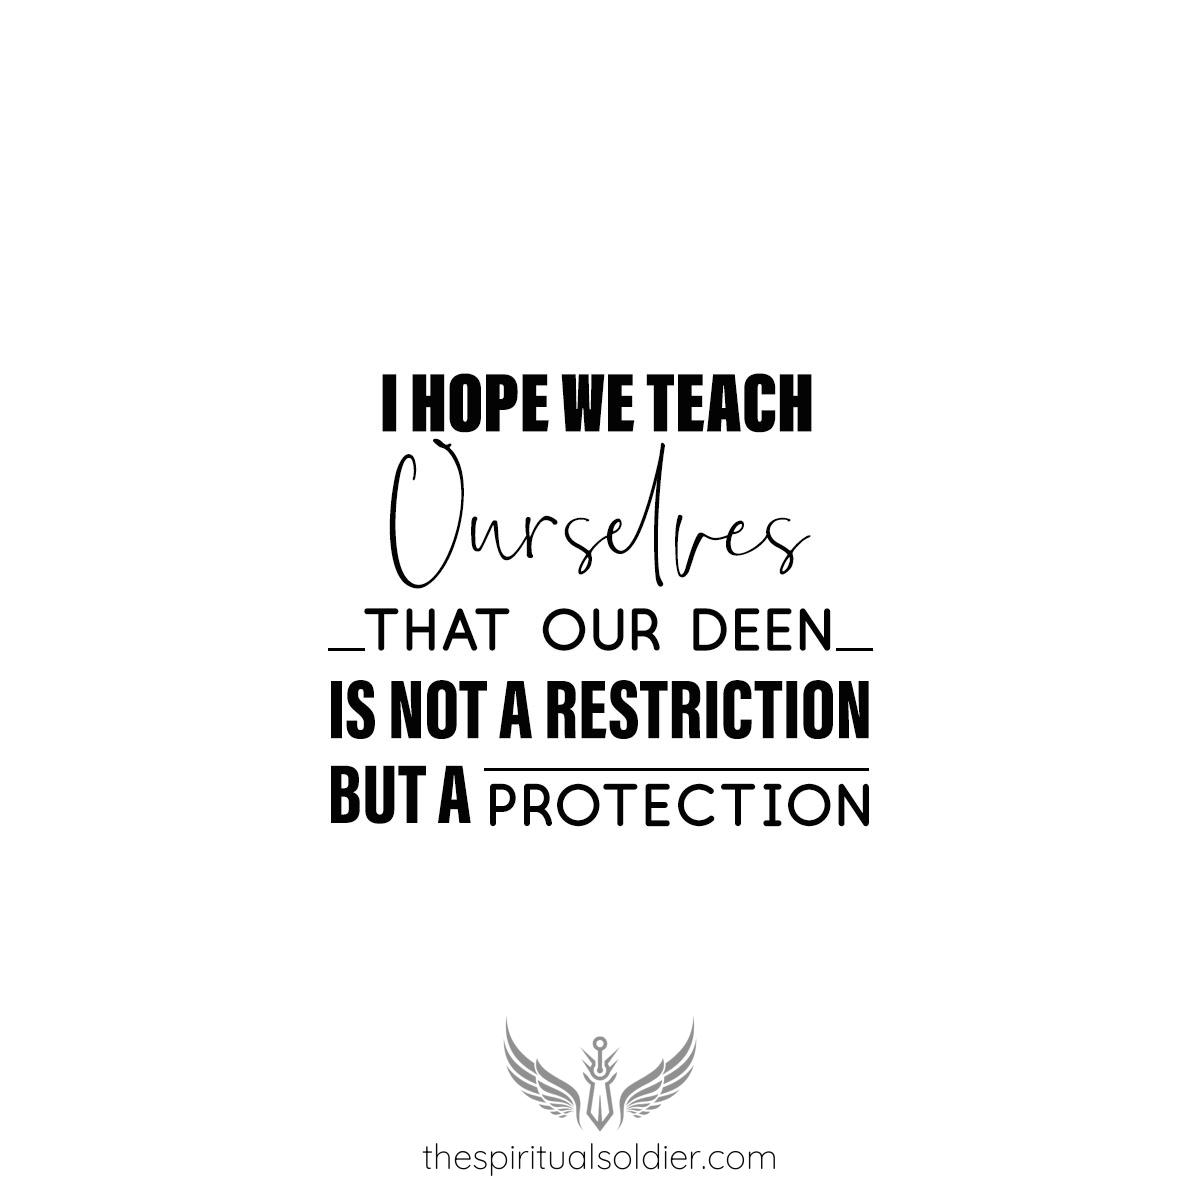 I hope we teach ourselves that our deen is not a restriction but a protection.

#drlepora #spiritualSoldier #FaithProtection #Empowerment #Spirituality #Liberation #Understanding #PositiveOutlook #EmbraceBeliefs #DeeperConnection #InnerPeace #Guidance #Strength #Unity